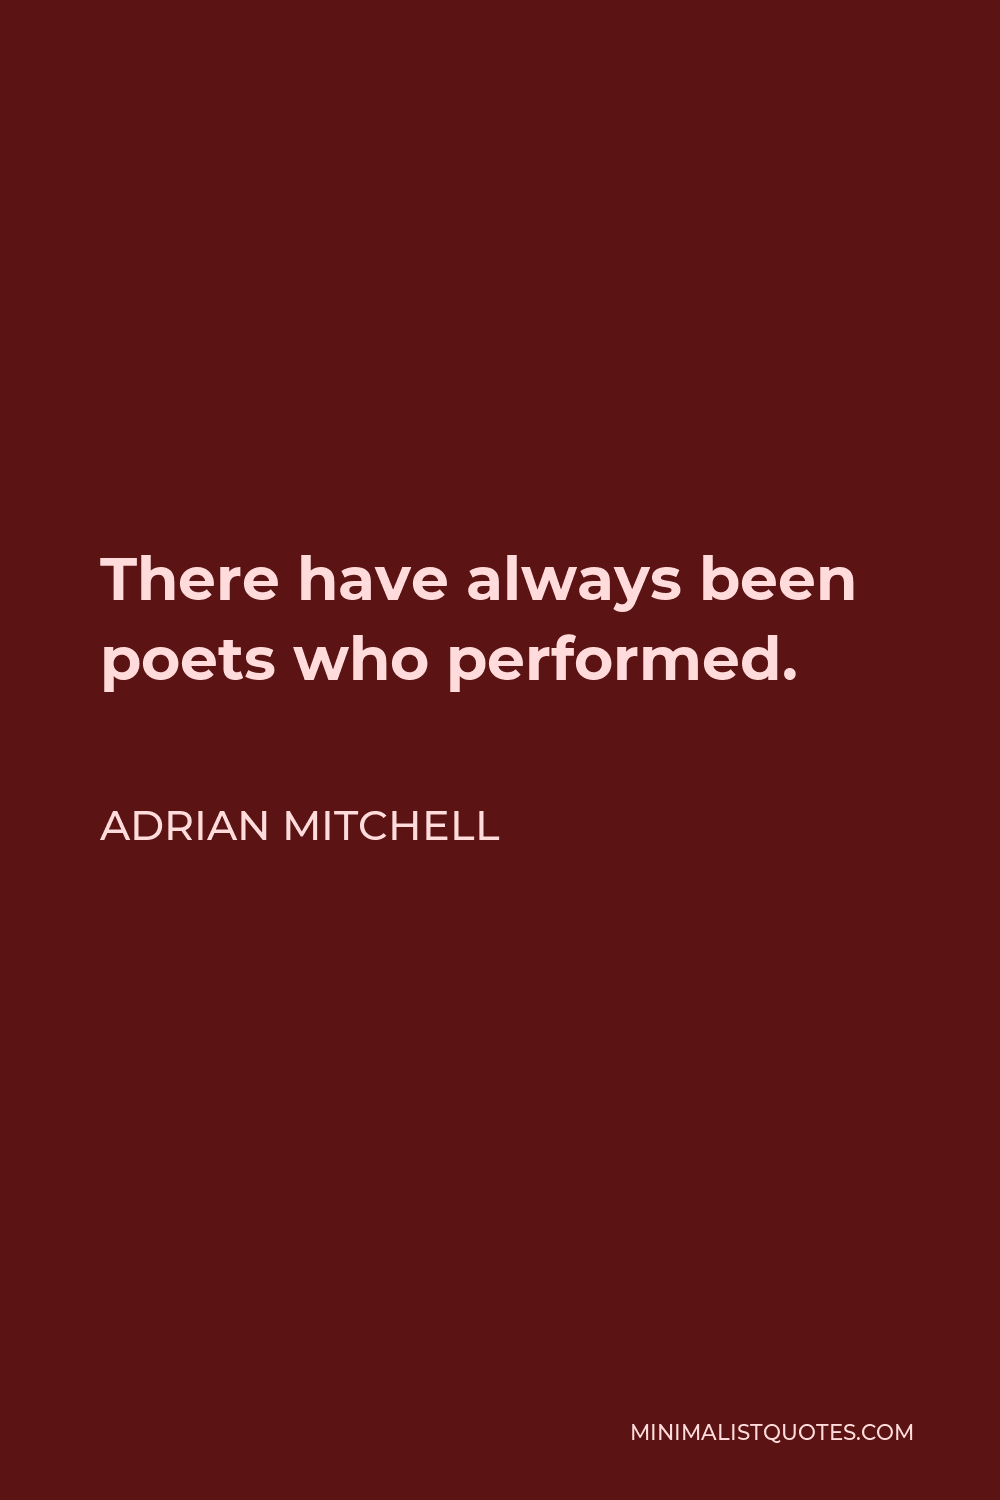 Adrian Mitchell Quote - There have always been poets who performed.